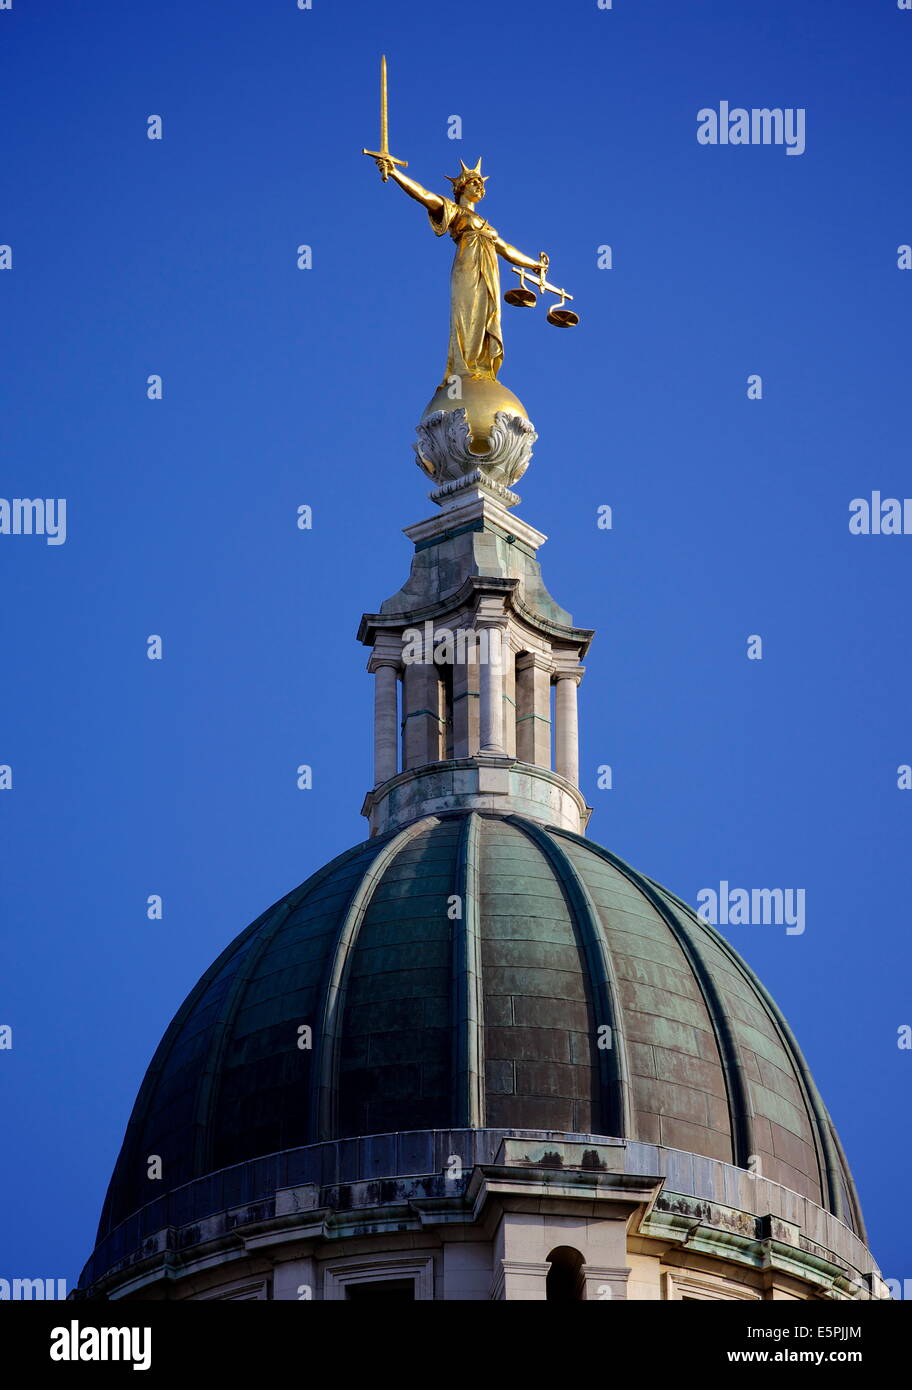 Scales of Justice above the Old Bailey Law Courts (Central Criminal Court) on former site of Newgate Prison, London, England, UK Stock Photo